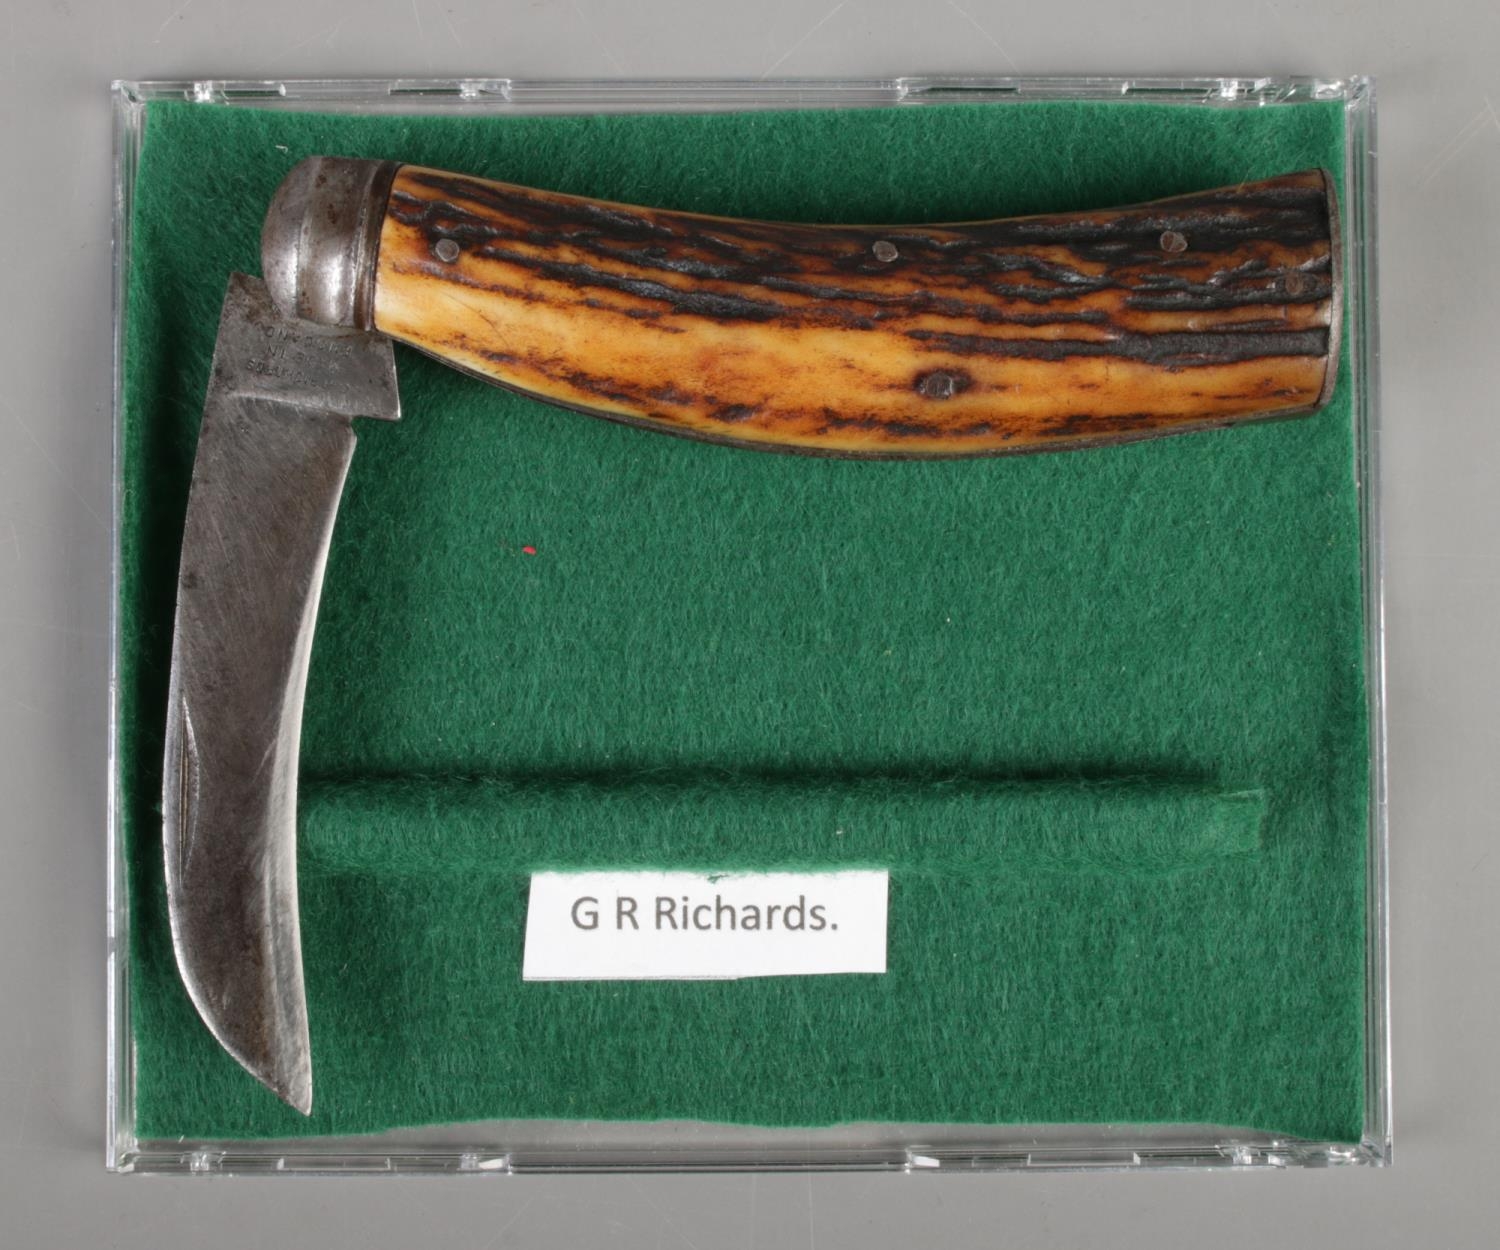 A Sheffield made folding knife with antler handle, by G.H Richards.